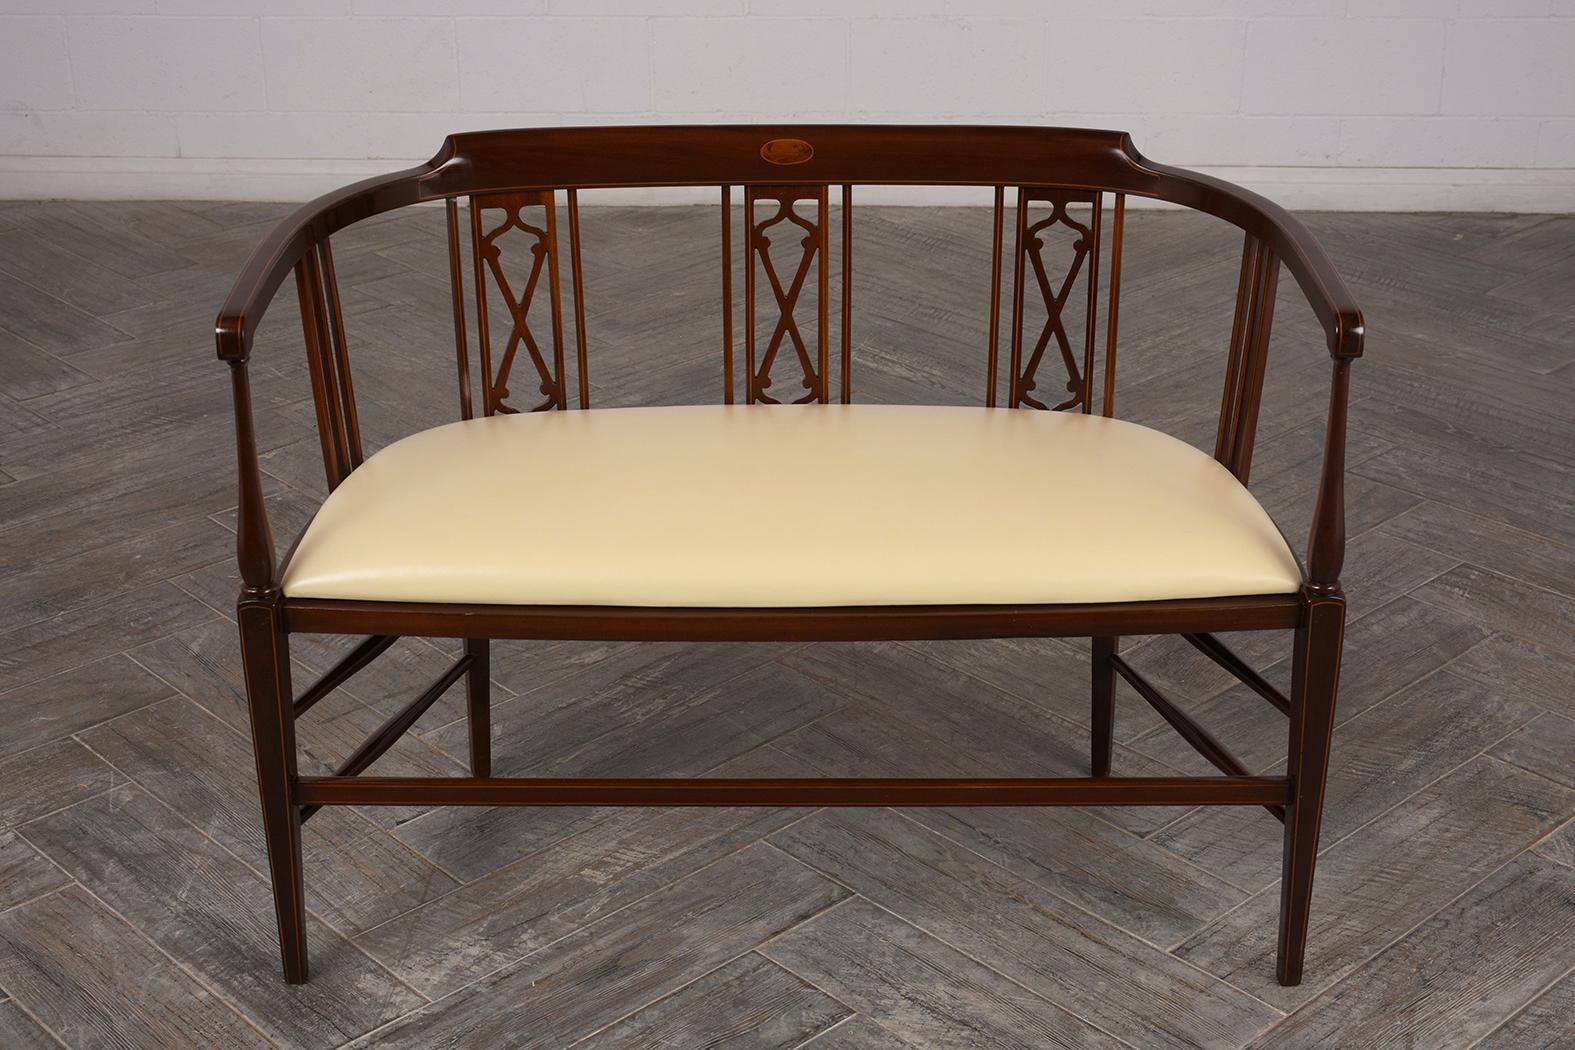 This English Inlay Regency Bench has been fully restored, made out of solid mahogany wood, and features its original rich dark walnut stain with a lacquered finish. The bench also has an inlay design, curved backrest, and the seat has been newly